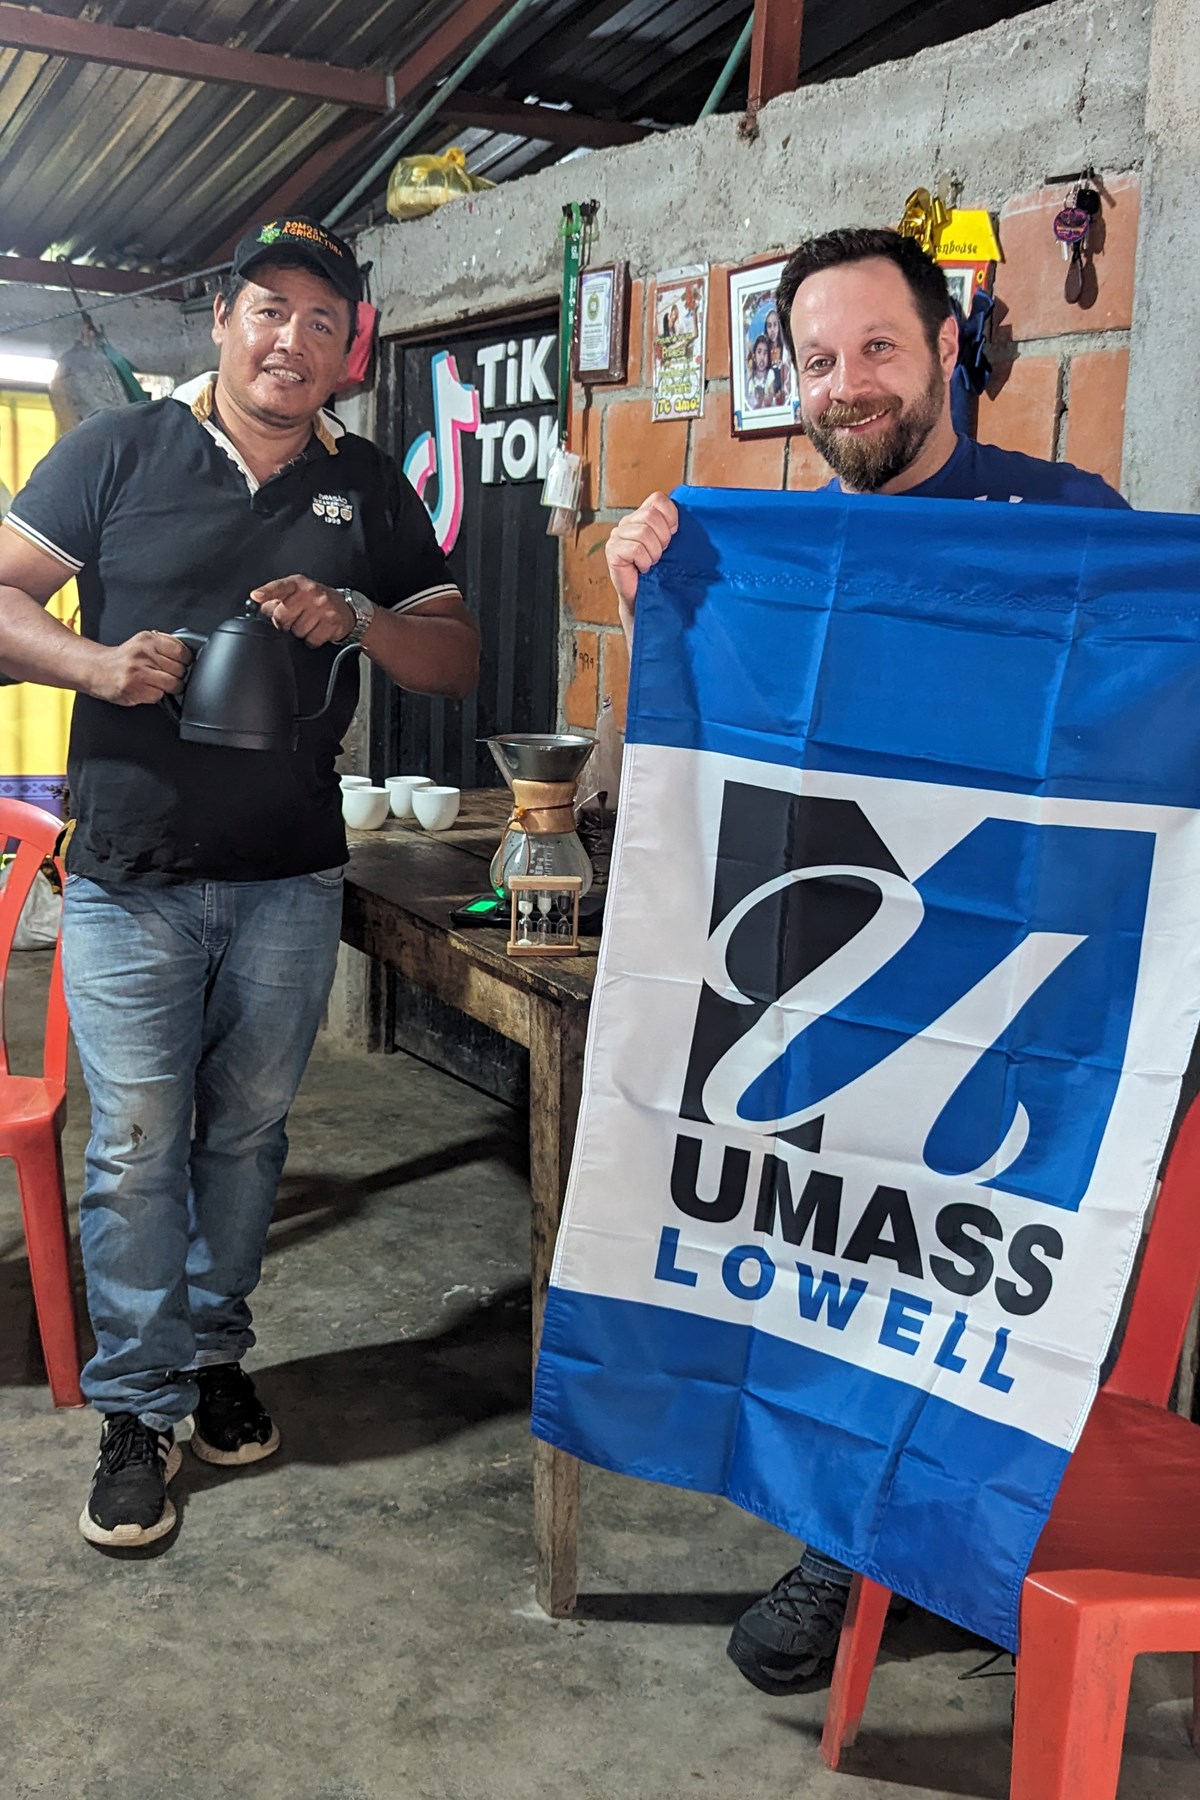 A person with a beard holds a UMass Lowell flag while posing for a photo with a person holding a coffee pot.